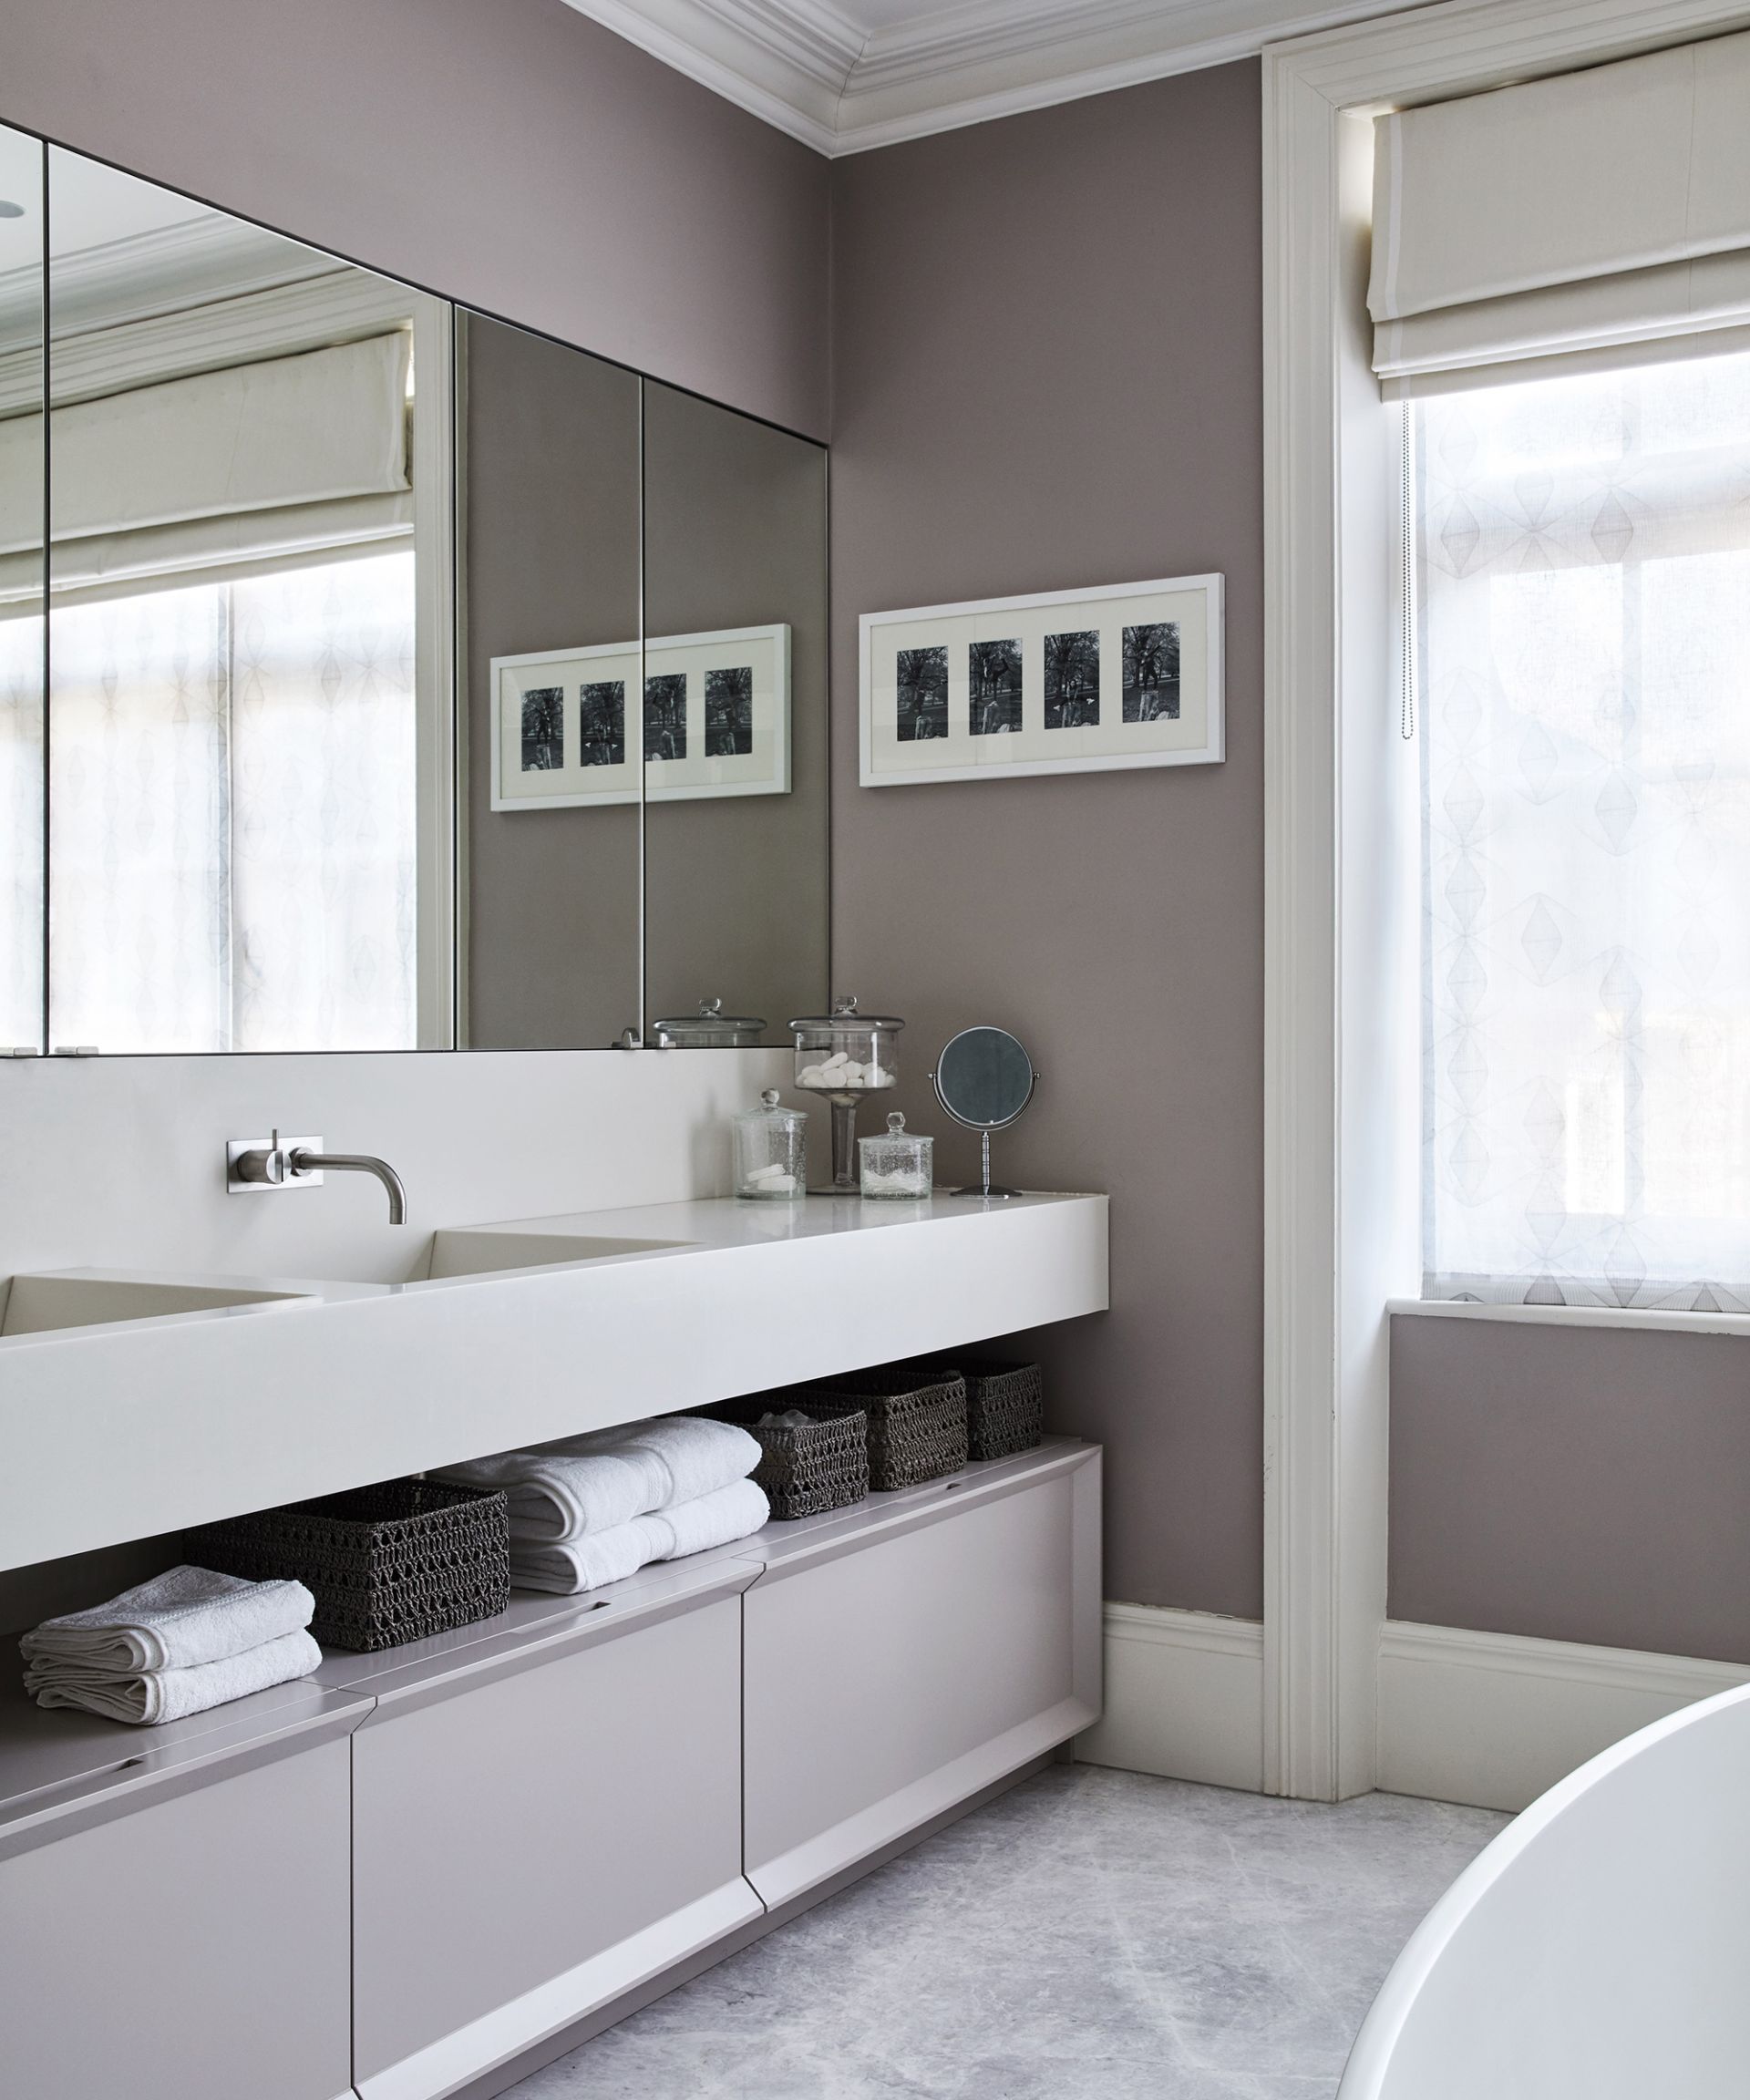 <p>                     Family bathrooms need to store a lot of stuff, and there’s really no such thing as too much storage here.                    </p>                                      <p>                     Shelves can look good if they are kept tidy, but to hide clutter, cabinets with doors are a better bet.                   </p>                                      <p>                     And never underestimate the designers’ favorite bathroom storage tip: a light, bright decorating scheme and decent bathroom lighting never fail to enhance the sense of space.                   </p>